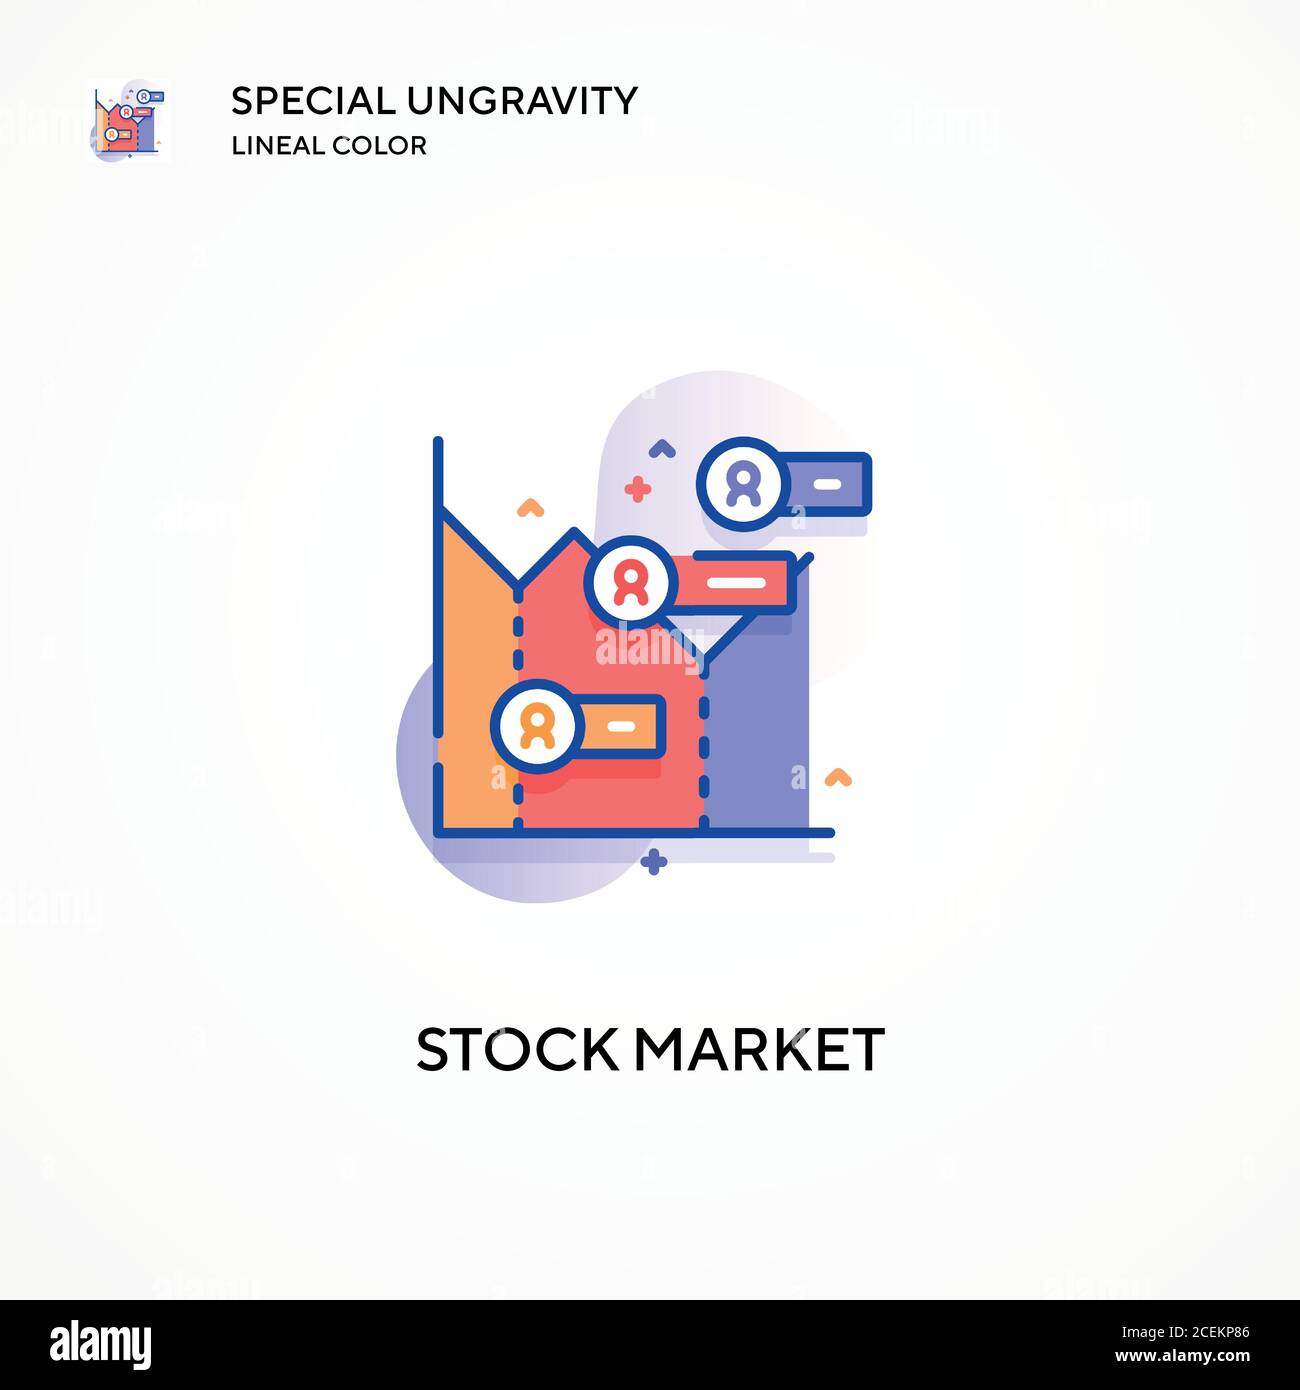 Stock market special ungravity lineal color icon. Modern vector illustration concepts. Easy to edit and customize. Stock Vector